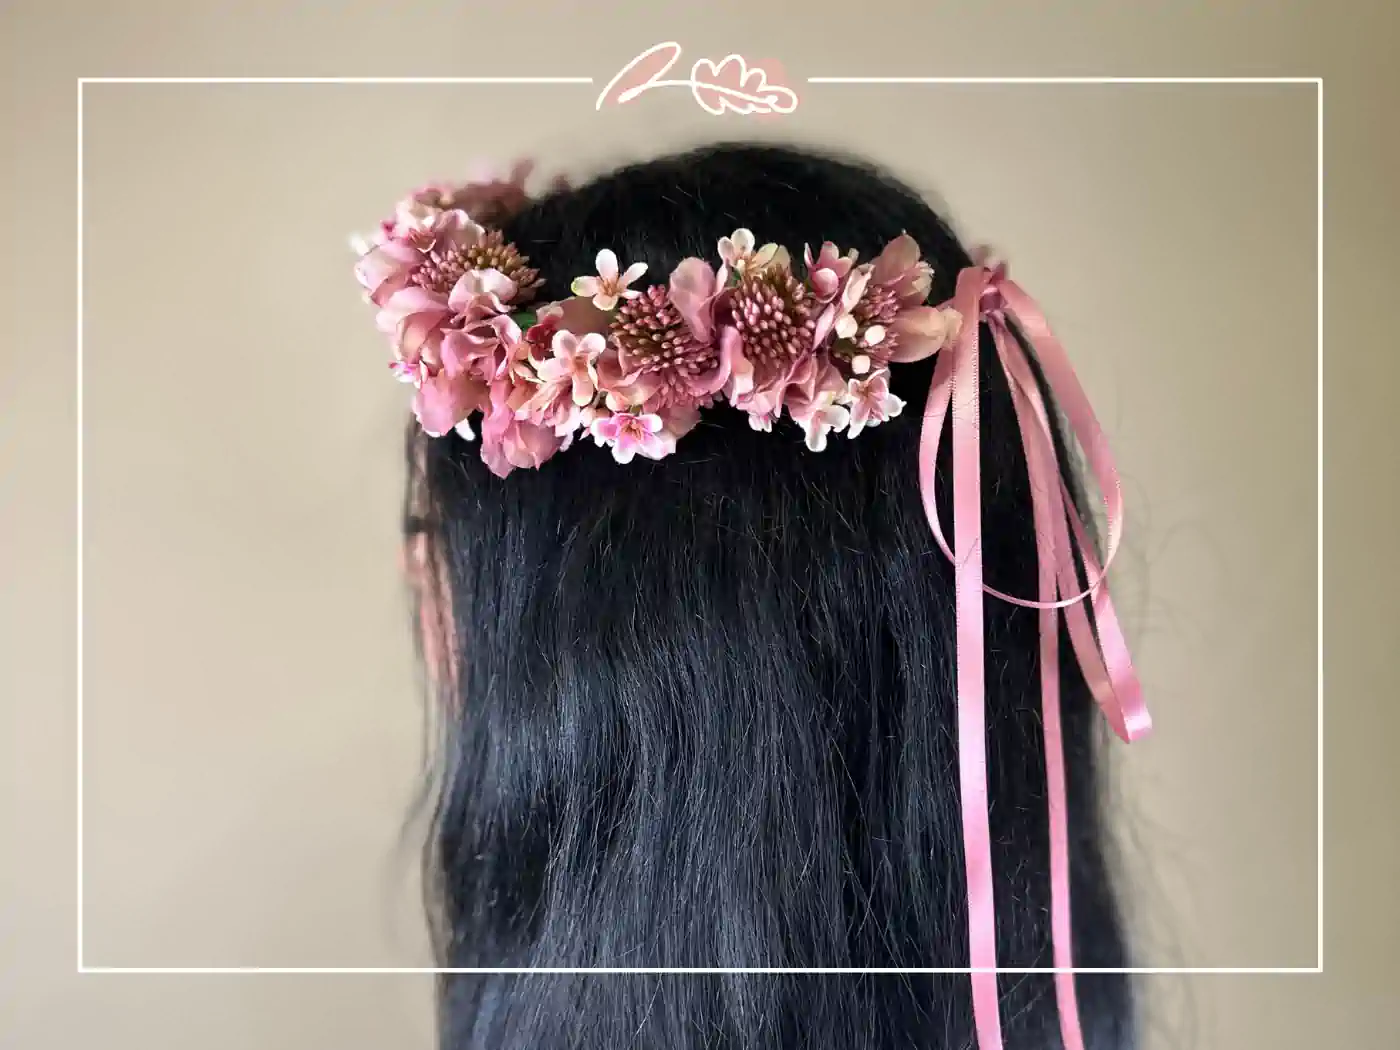 A woman with long dark hair wearing a pink floral crown adorned with ribbons. Fabulous Flowers and Gifts - Birthday Collection.